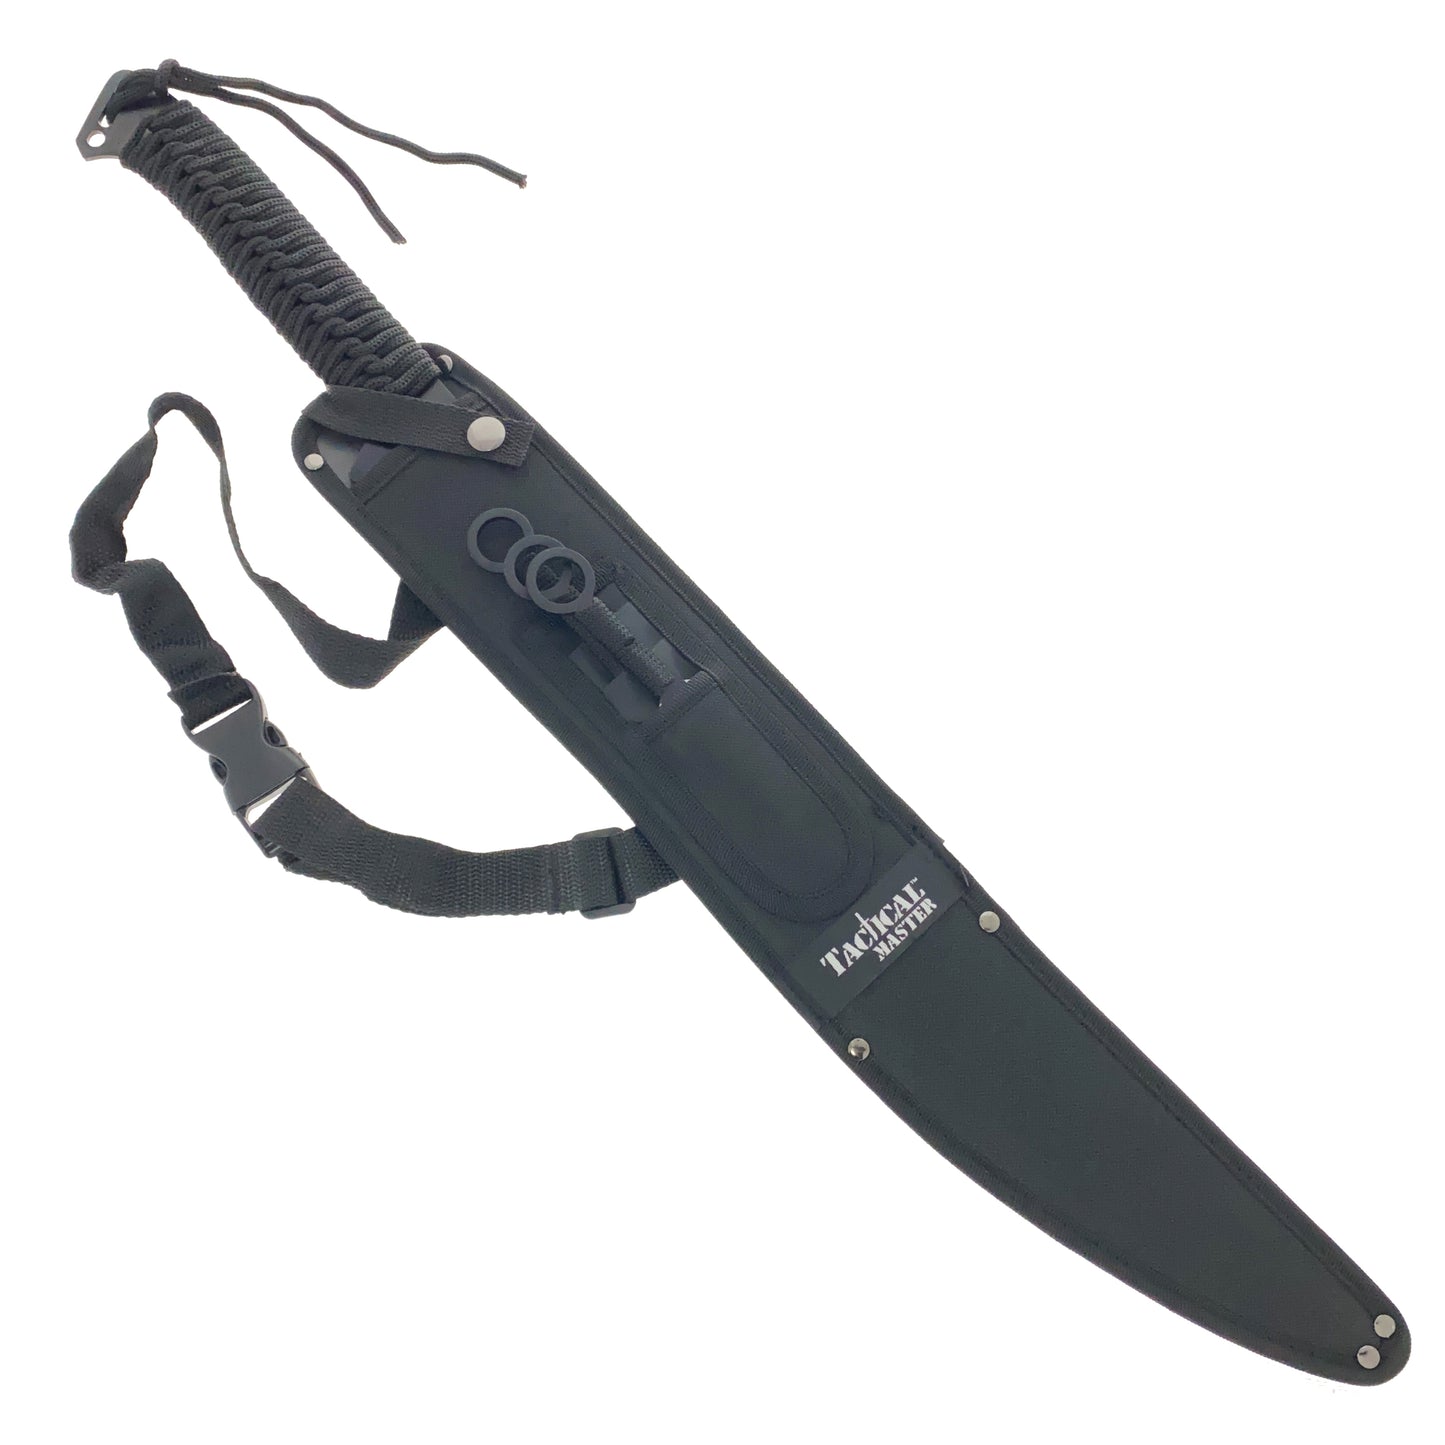 Tactical Master 28" Green Machete  w/ 3 Pcs Throwing Knives